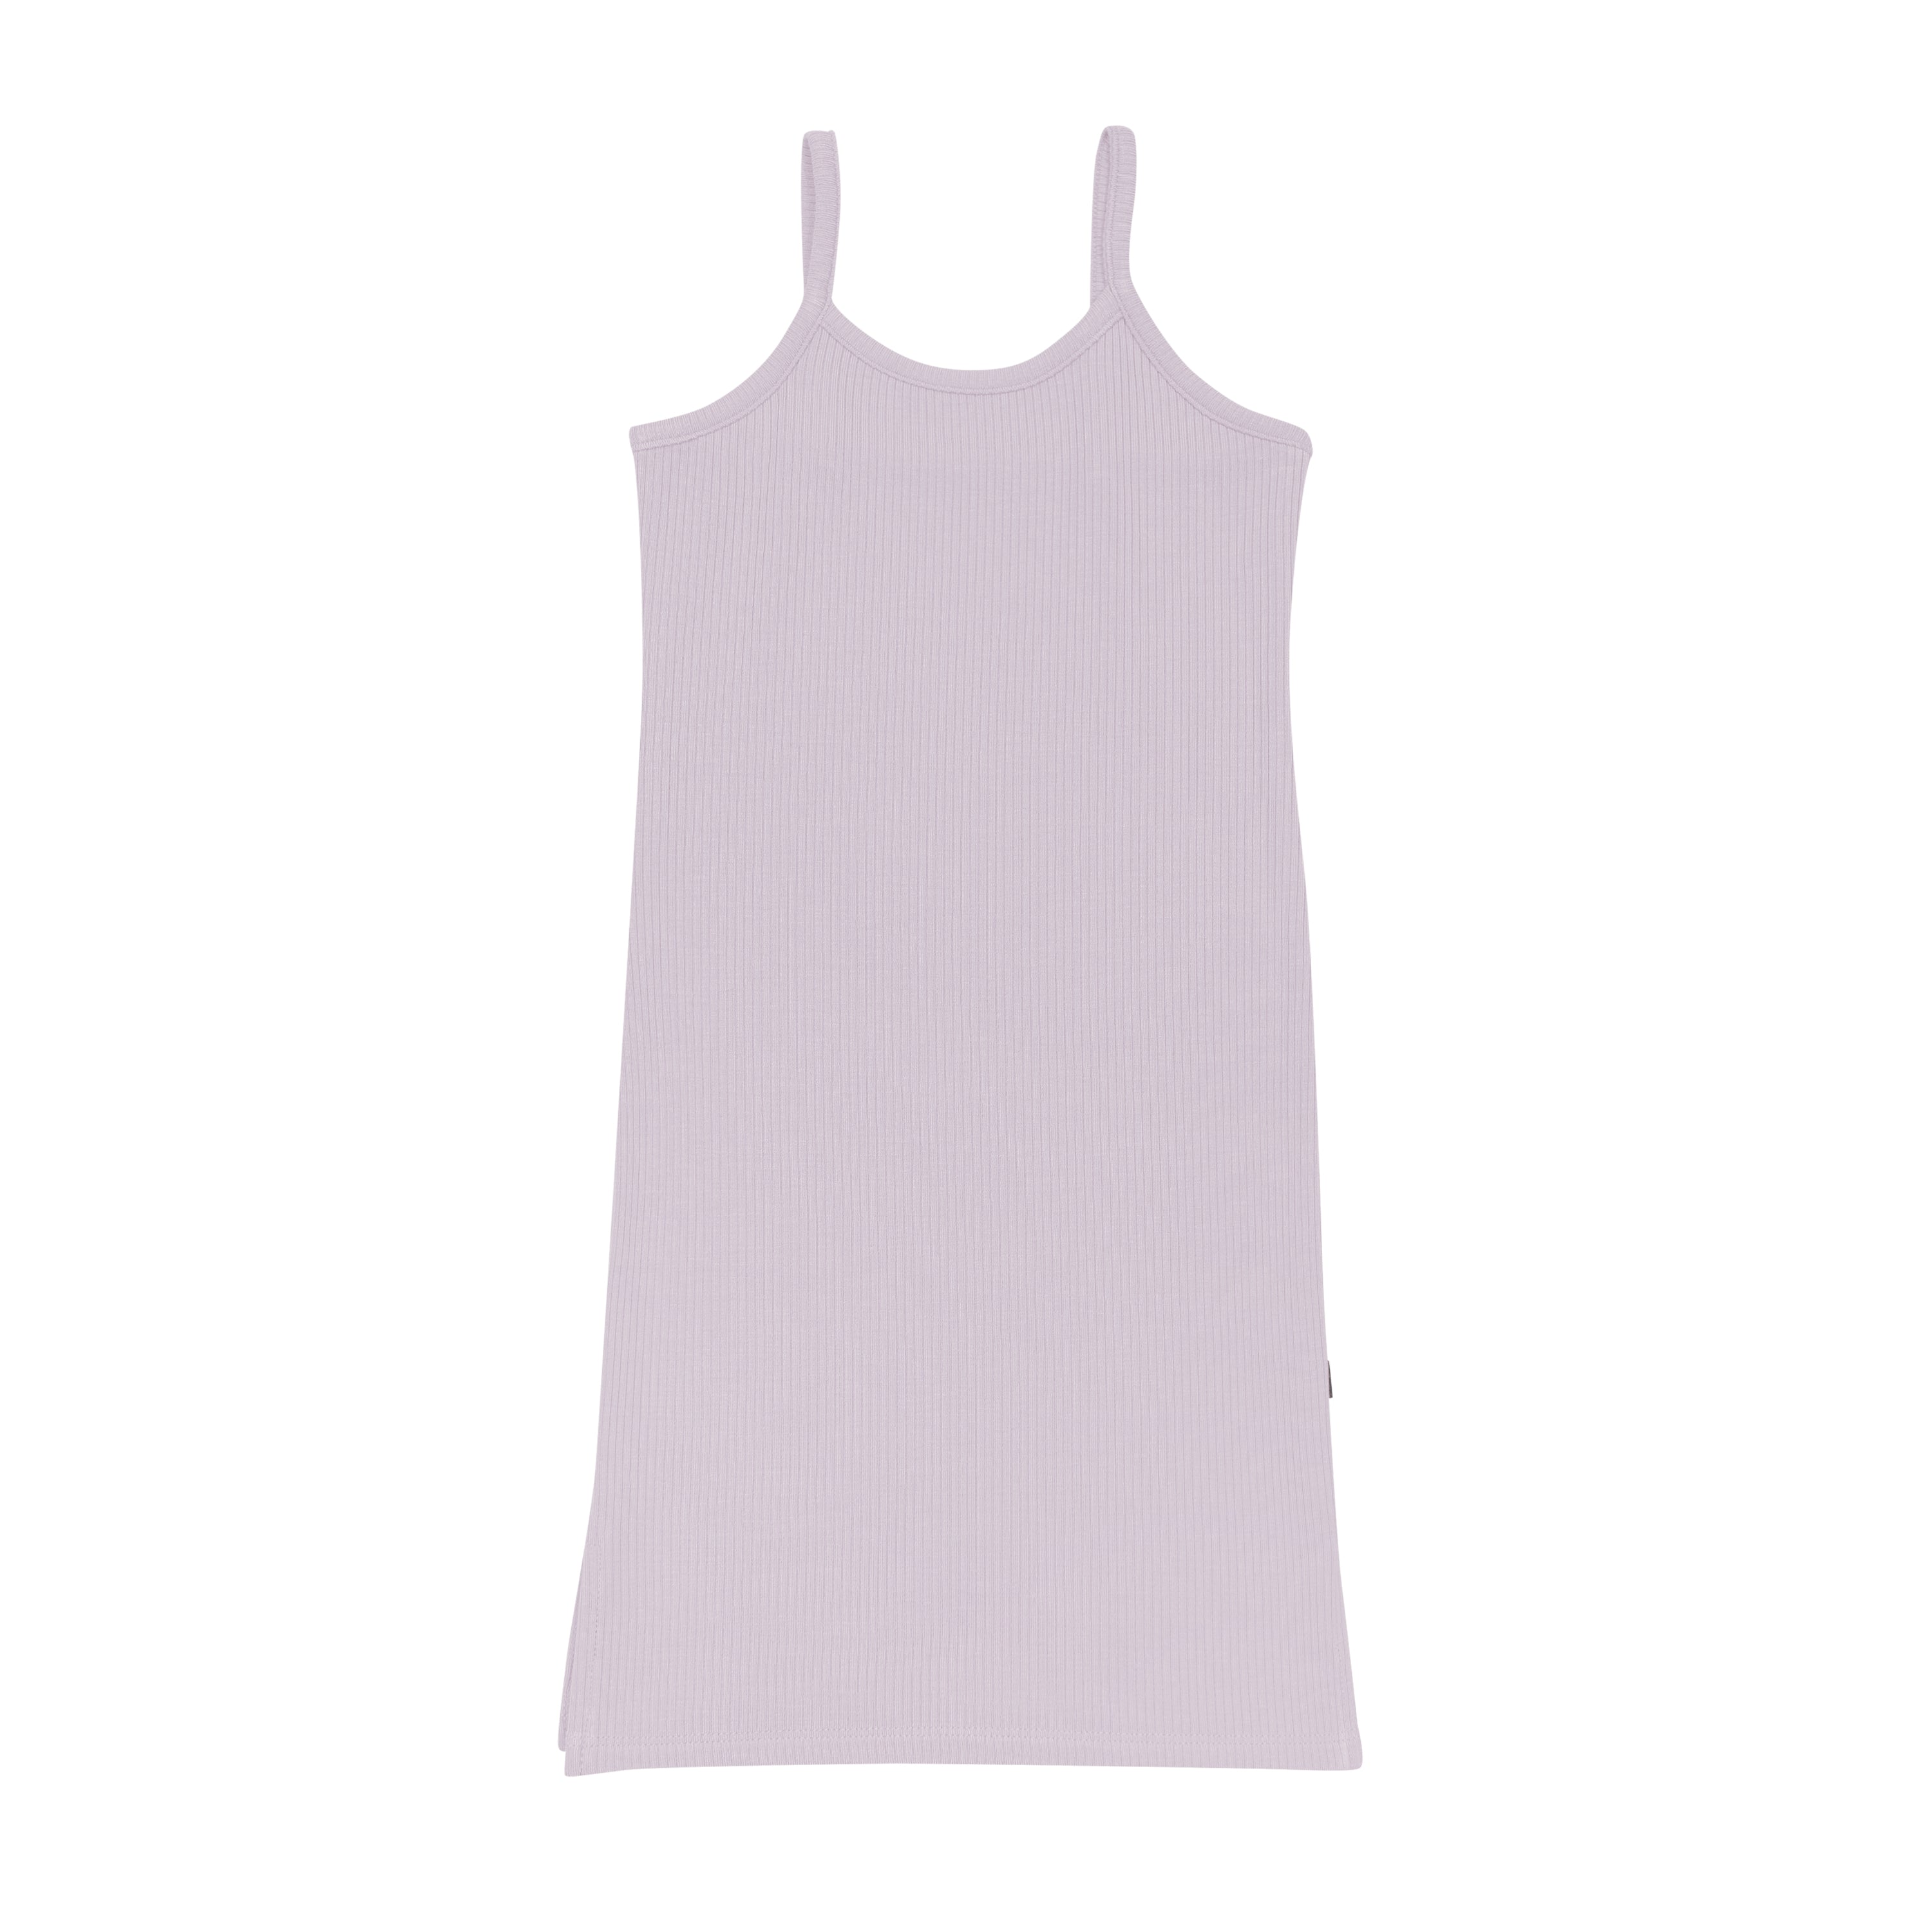 Kyte Baby Ribbed Toddler Cami Dress Ribbed Toddler Cami Dress in Wisteria